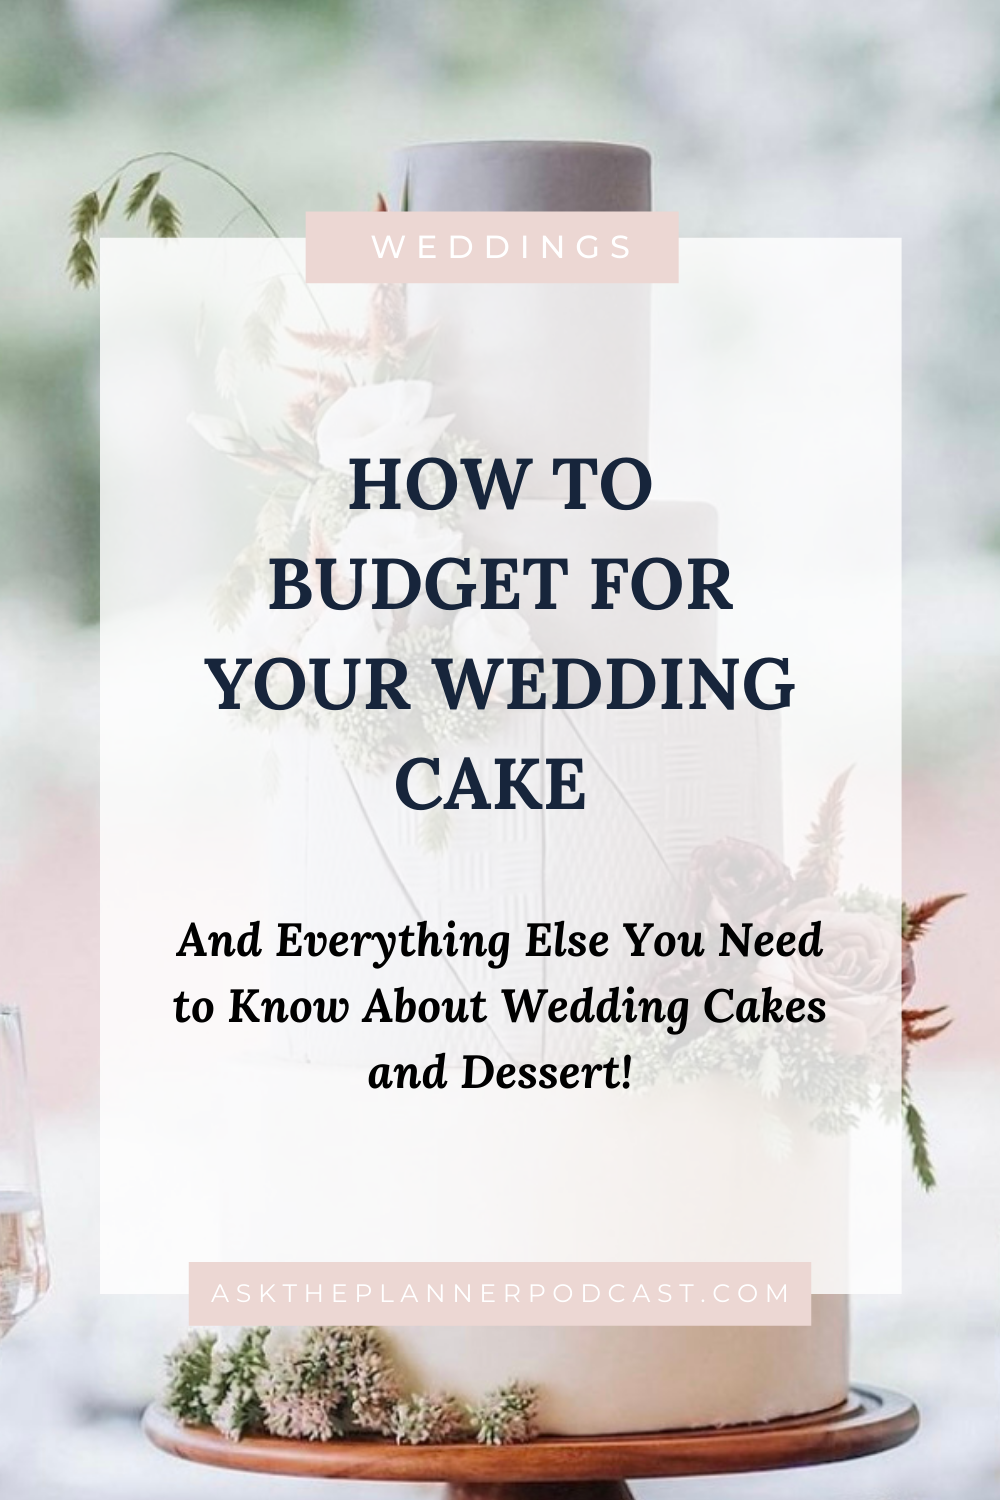 How to budget for your wedding cake